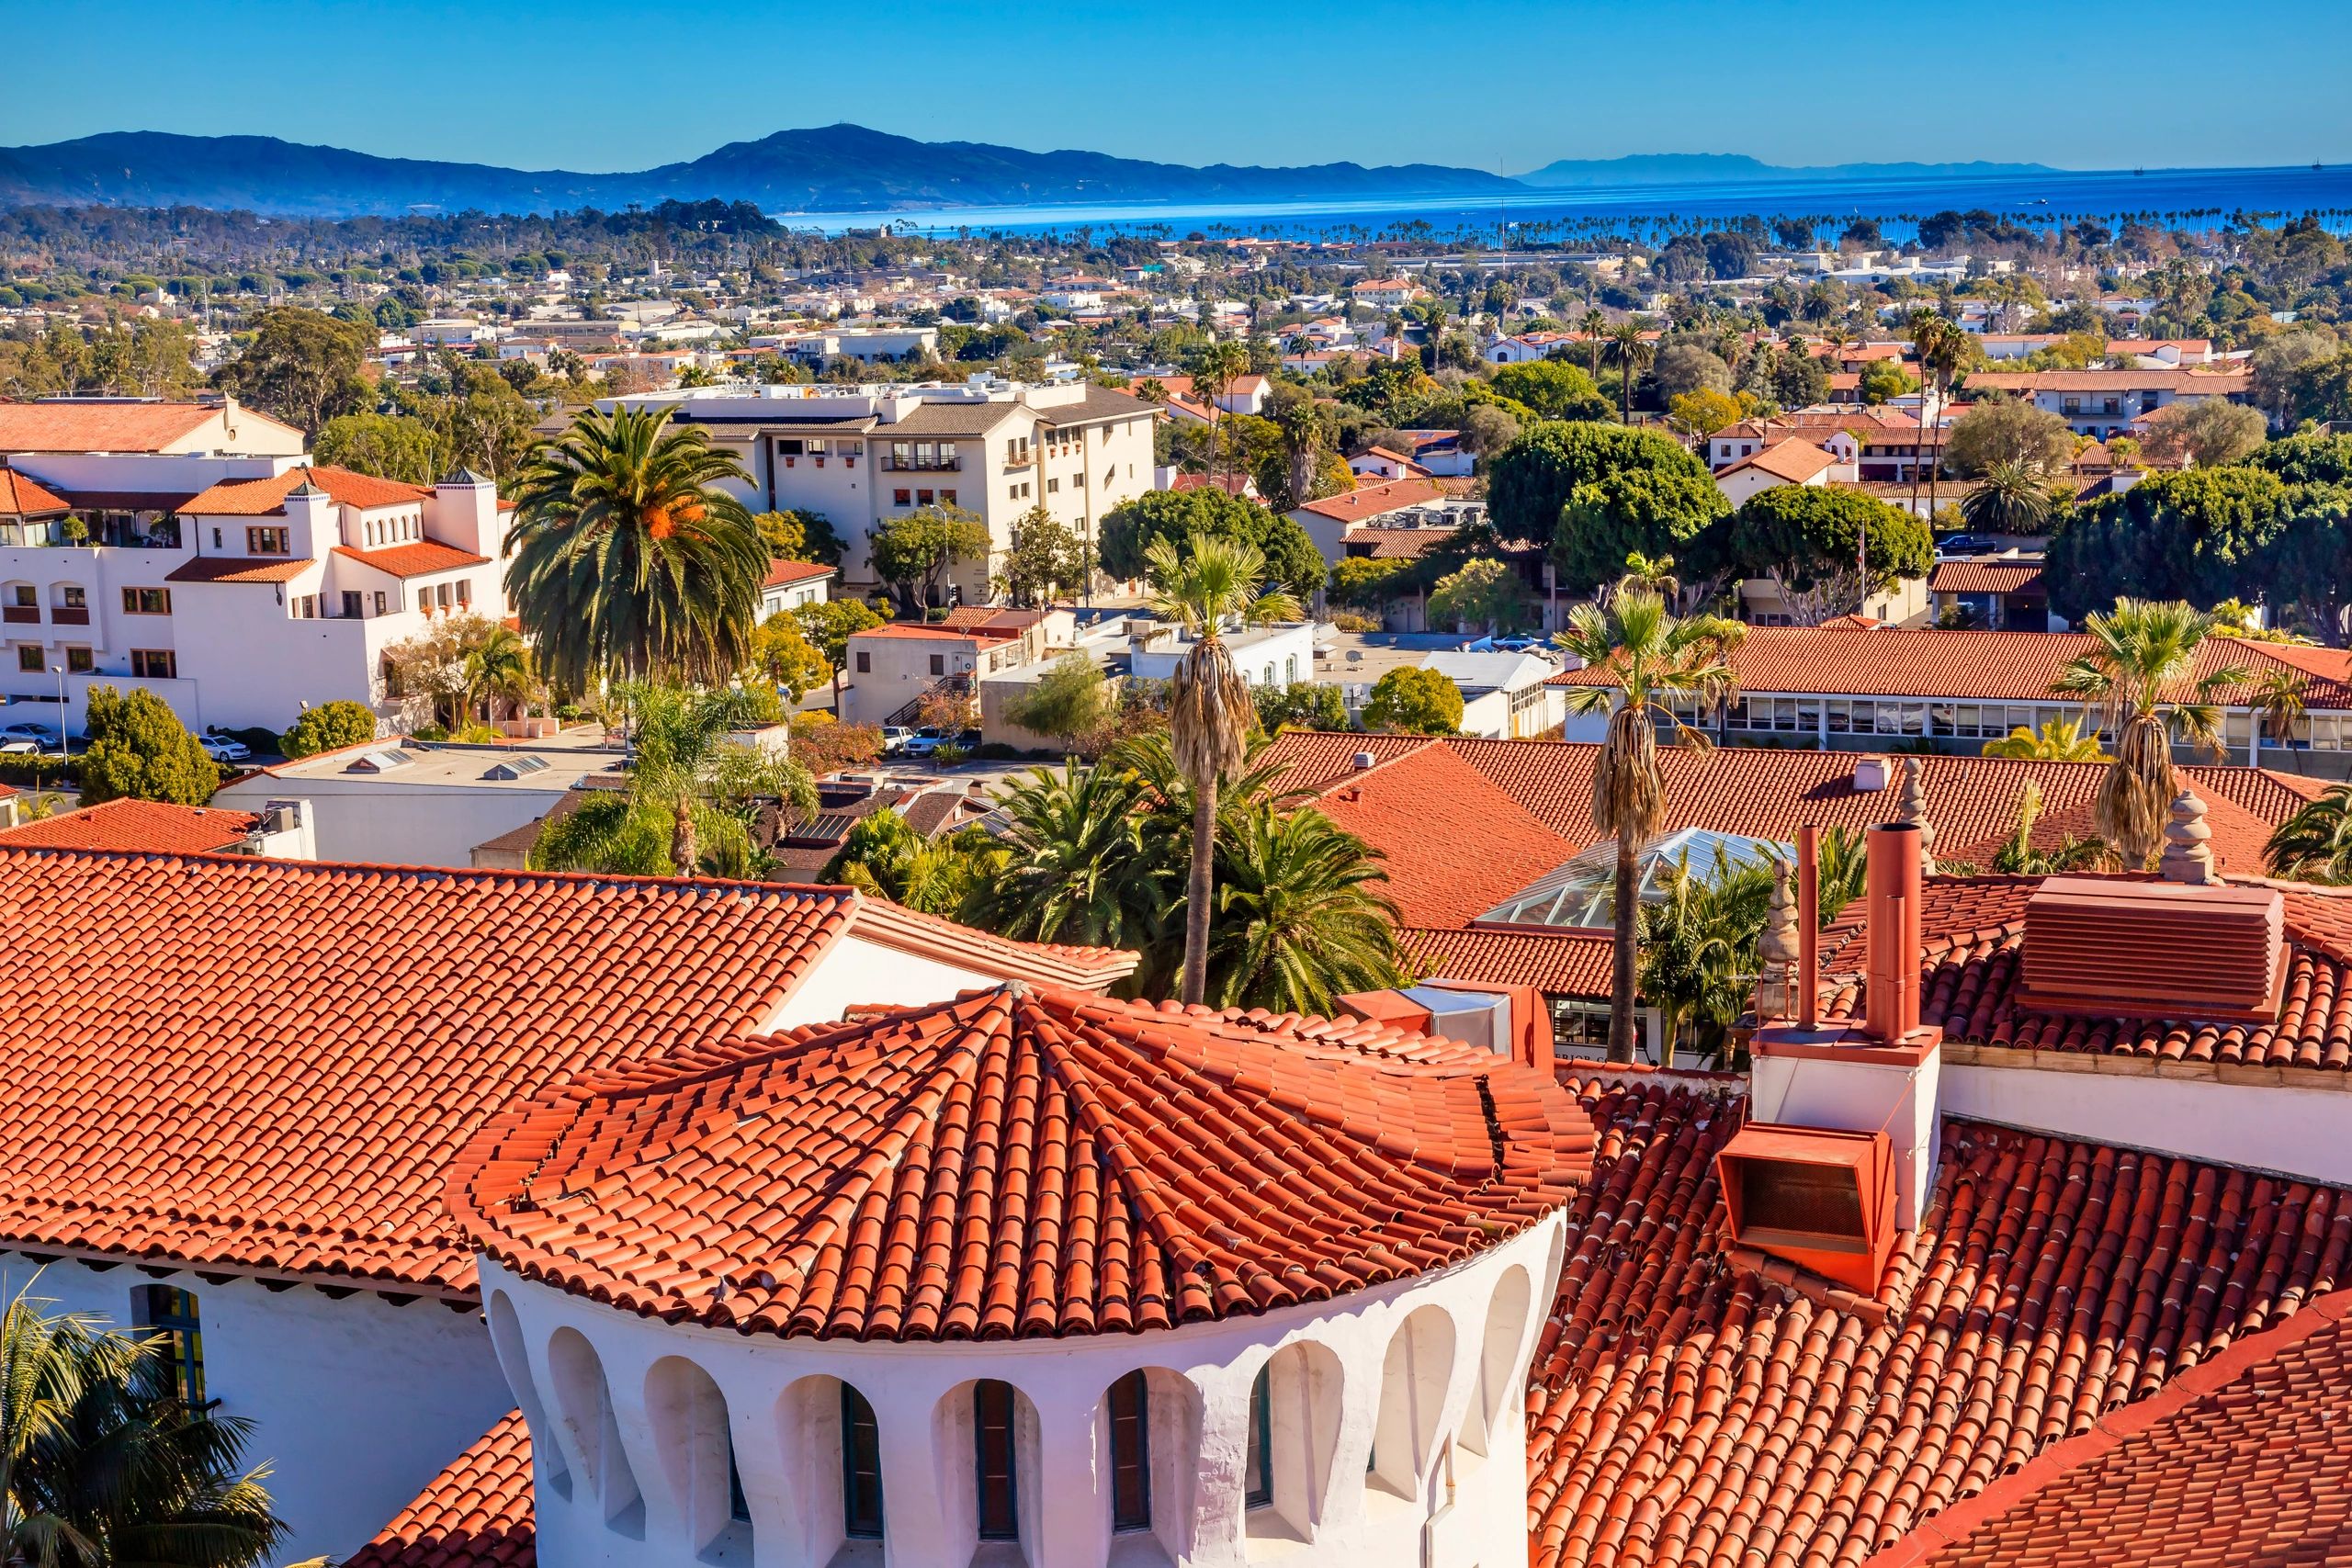 Santa Barbara courthouse.  The best place and view to practice divorce law and criminal defense.